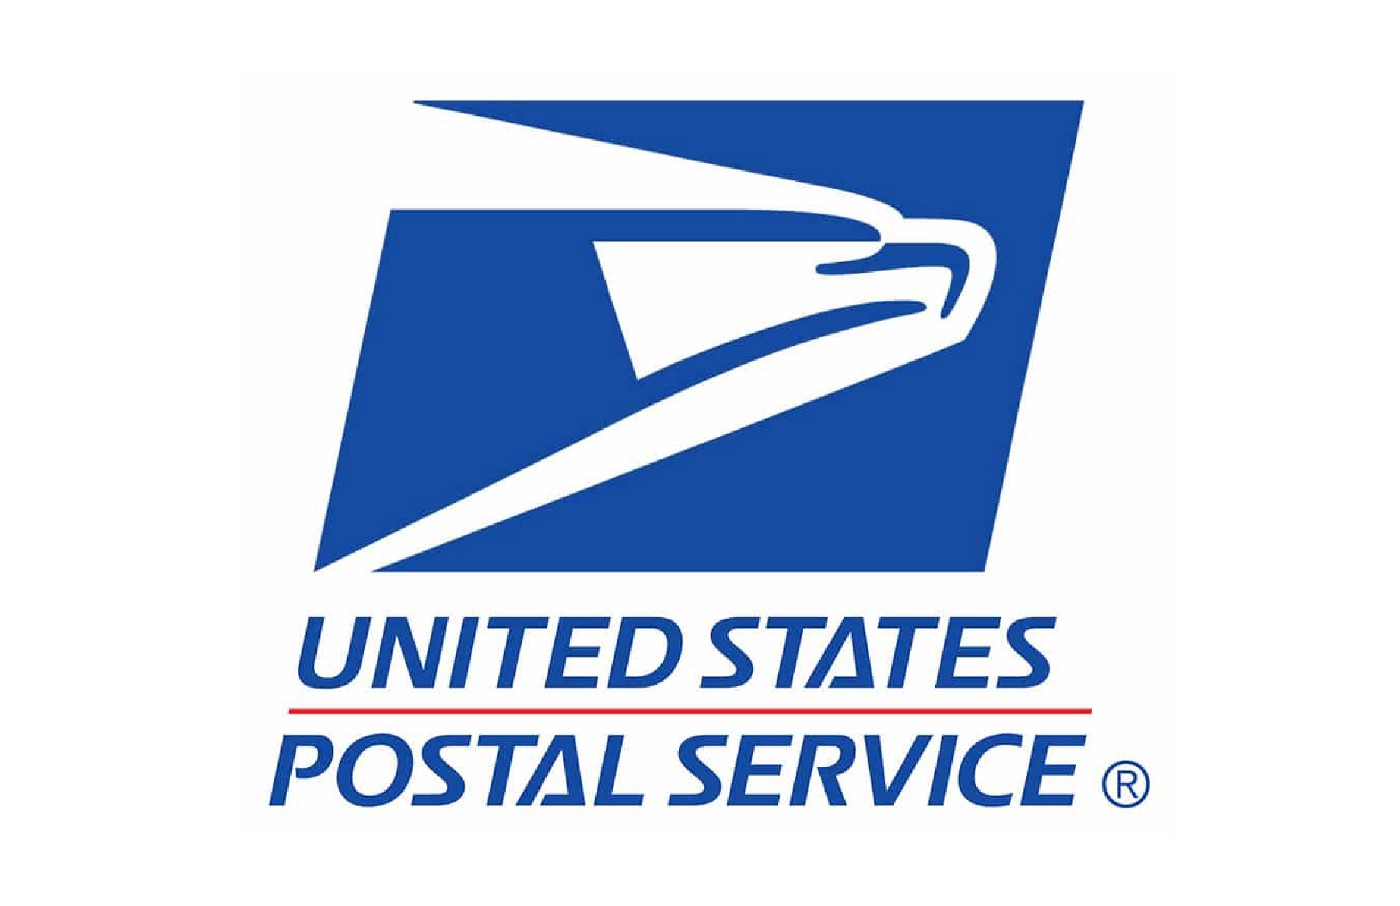 USPS Announces Temporary Price Increases for Commercial Parcels